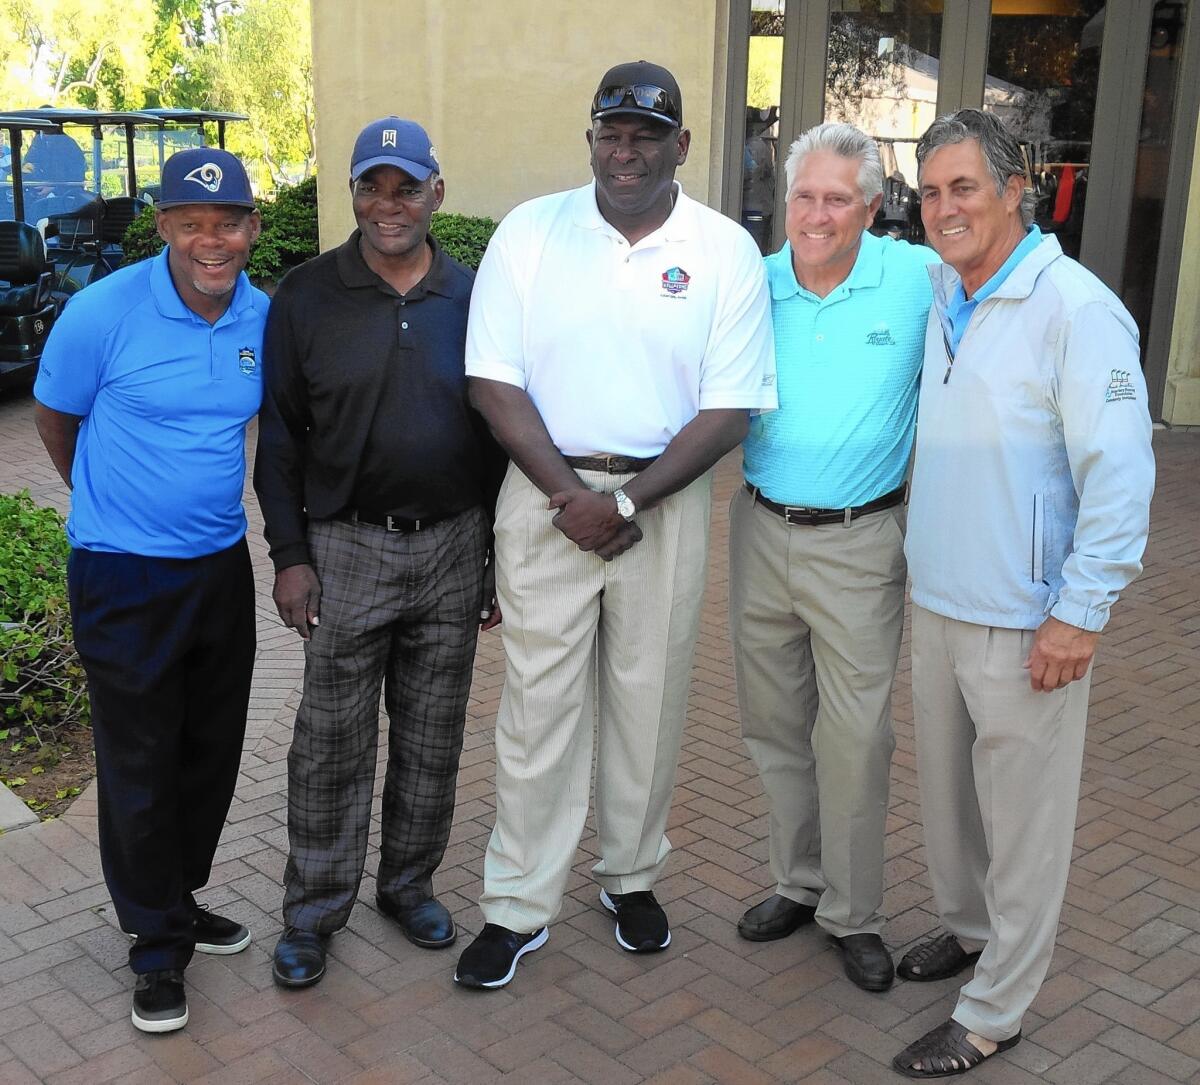 Lawrence McCutcheon, second from left, poses with former Rams, from left, LeRoy Irvin, Jackie Slater, Nolan Cromwell and Vince Ferragamo during the Rich Saul Memorial Golf Classic at Pelican Hill Golf Club on May 28.